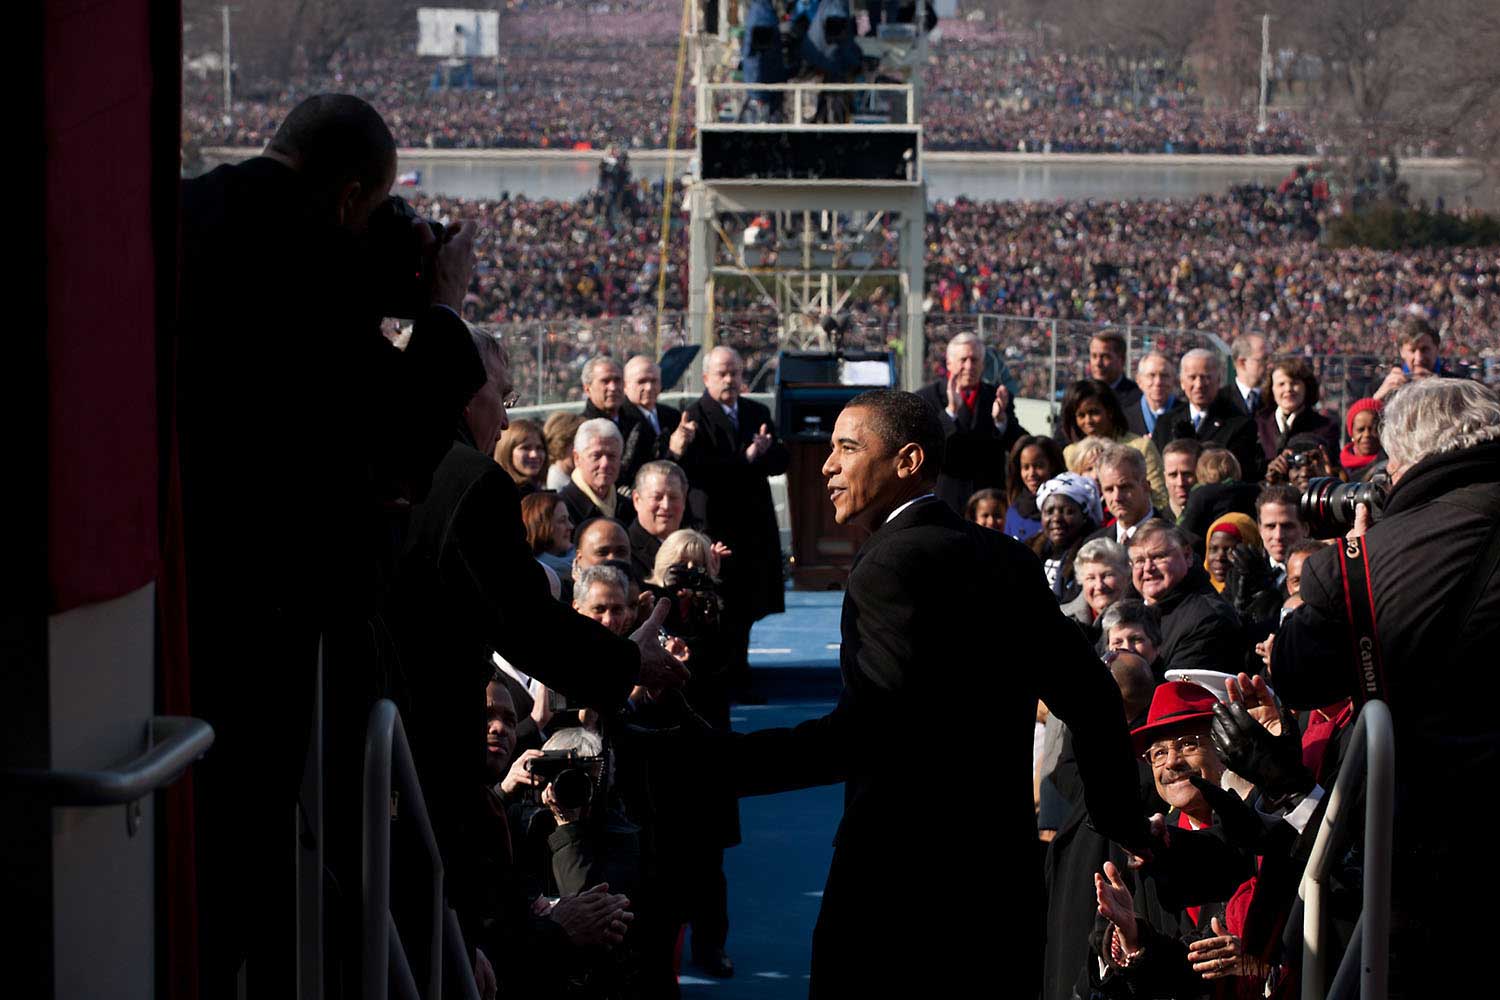 President-elect Barack Obama walks to the podium for his Inauguration as the 44th President at the U.S. Capitol in Washington, D.C., Jan. 20, 2009.